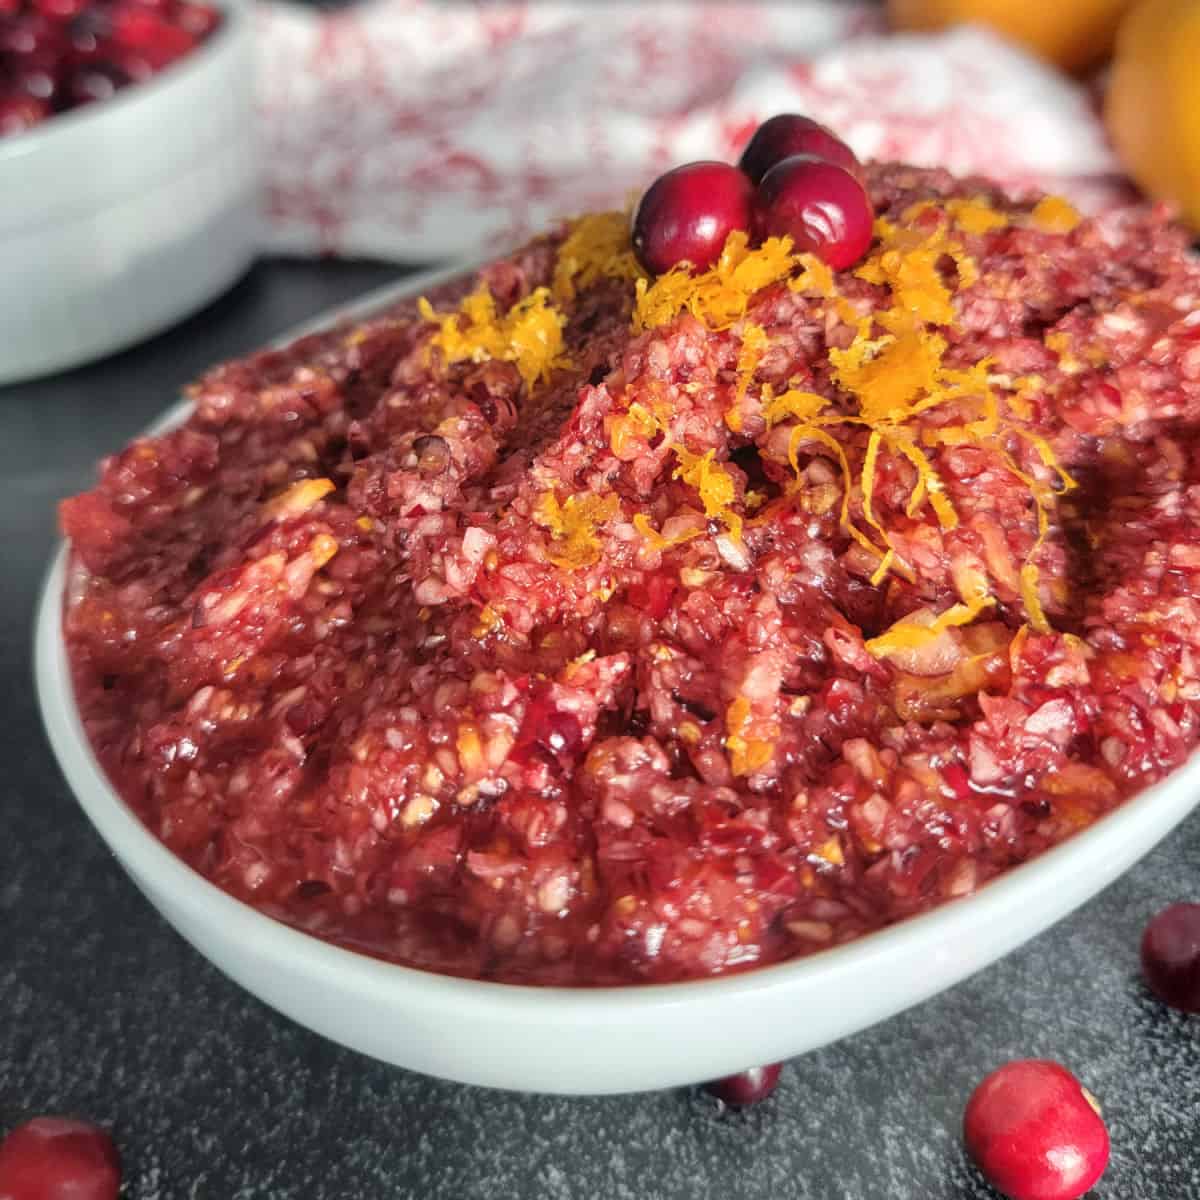 Cranberry Orange Relish in a white bowl garnished with citrus zest and cranberries